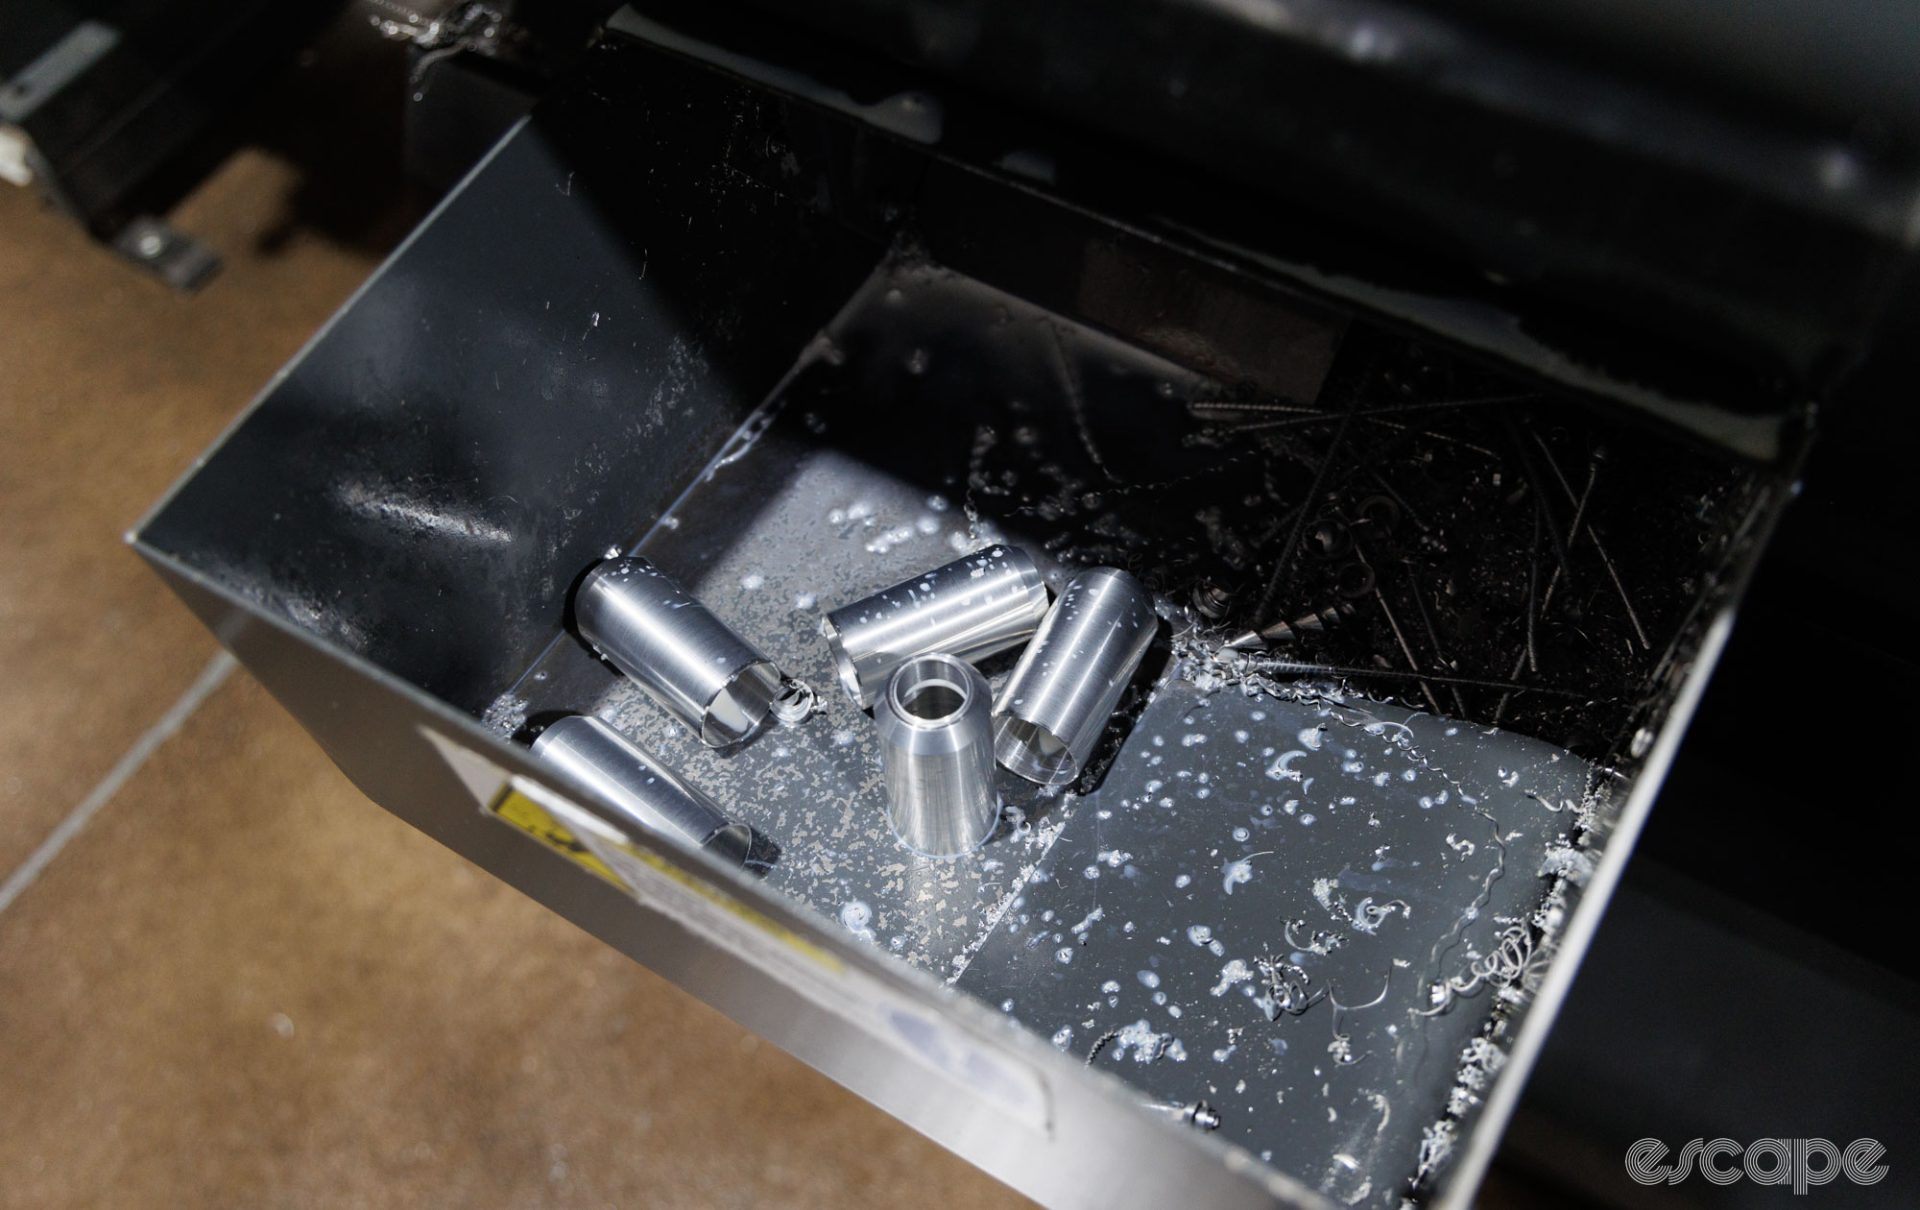 Machined parts of the Star Nut Setter sit in a tray below the machine, sitting in a pile of what look like very sharp metal shavings.